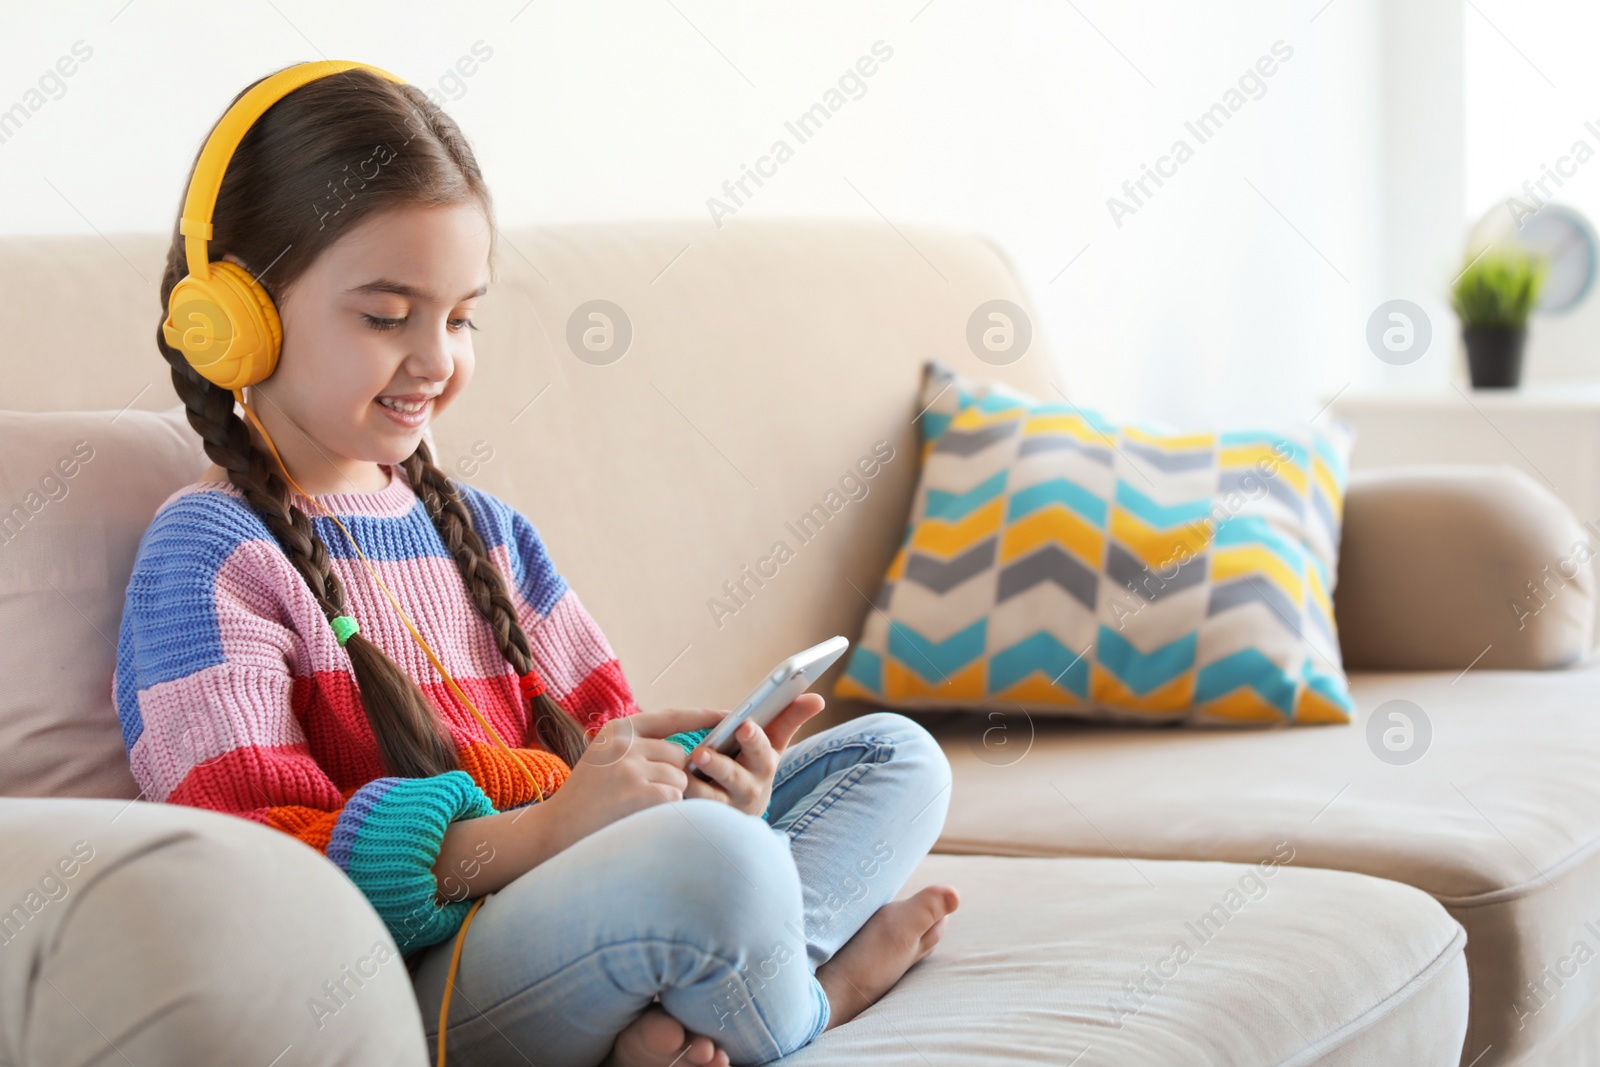 Photo of Cute child with headphones and mobile phone on sofa indoors. Space for text